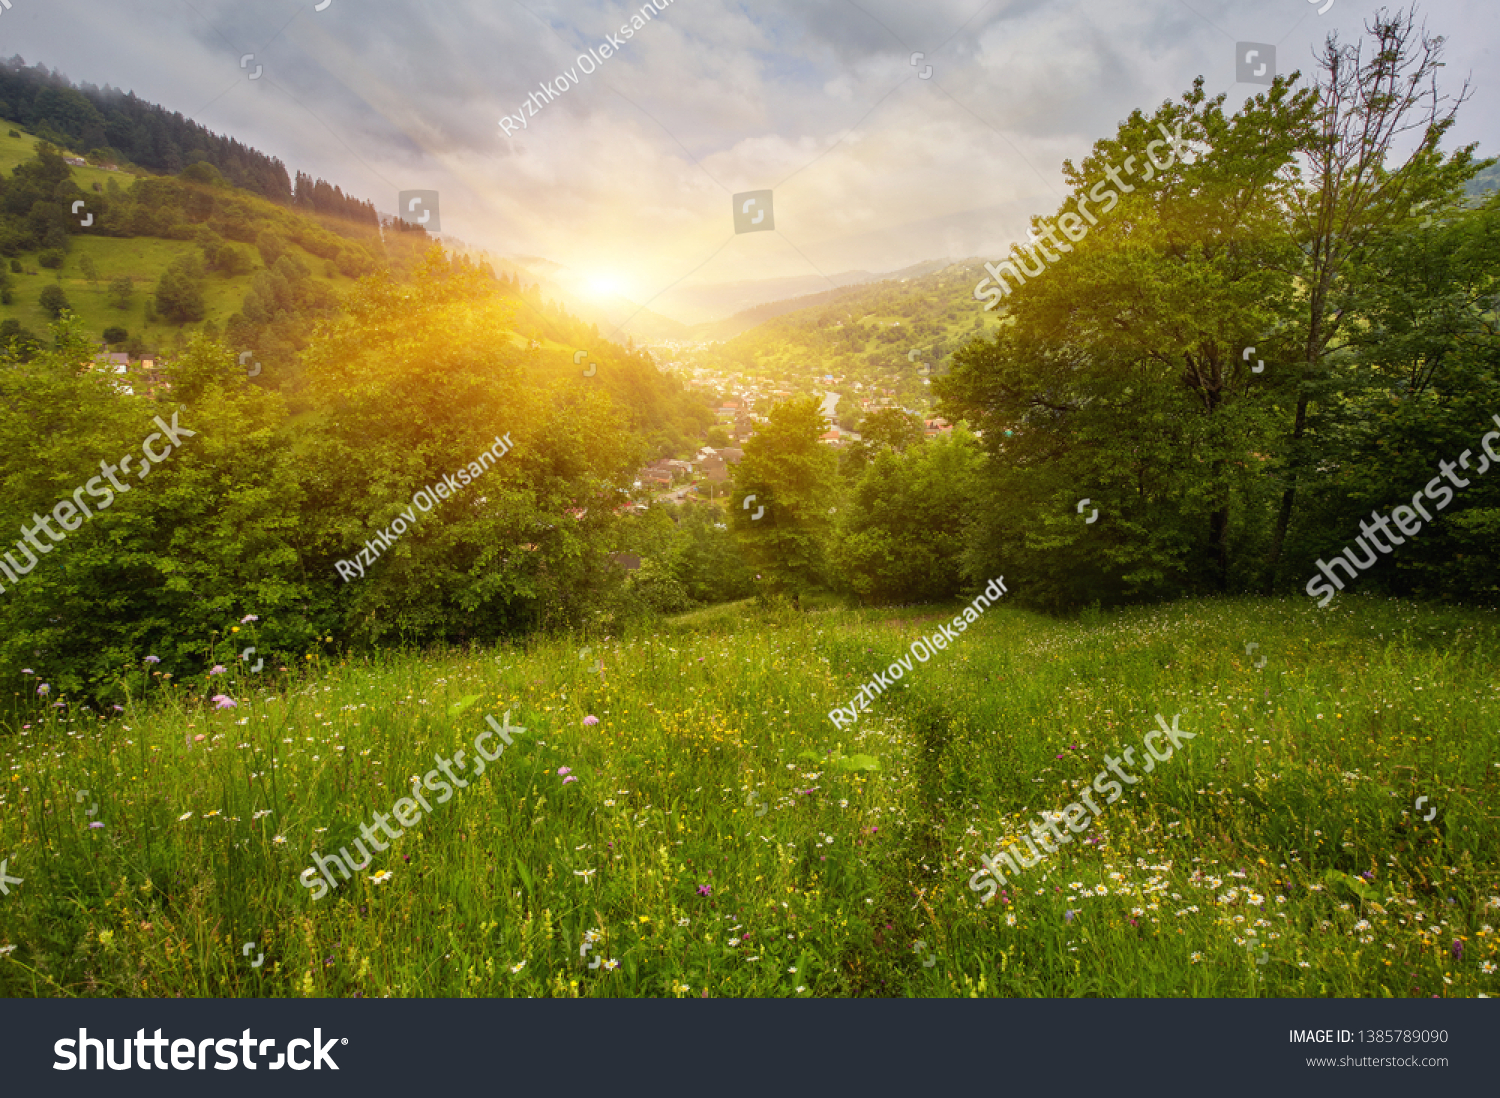 Panoramic view of beautiful landscape in the Alps with fresh green meadows and blooming flowers and snow-capped mountain tops in the background on a sunny day with blue sky and clouds in springtime. #1385789090